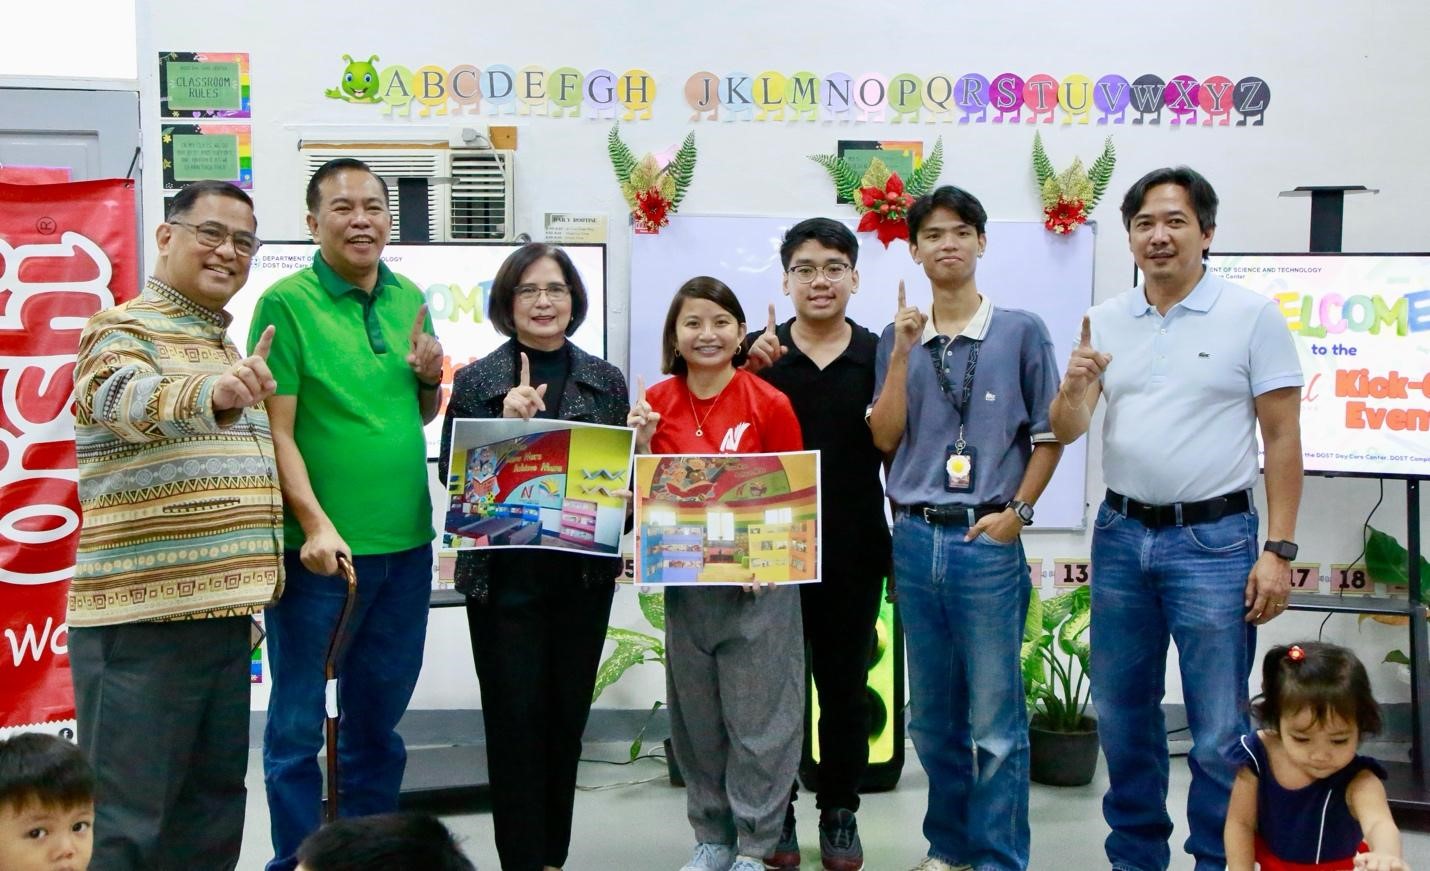 The DOST Day Care Center receives a major boost through aid from the National Bookstore Foundation image